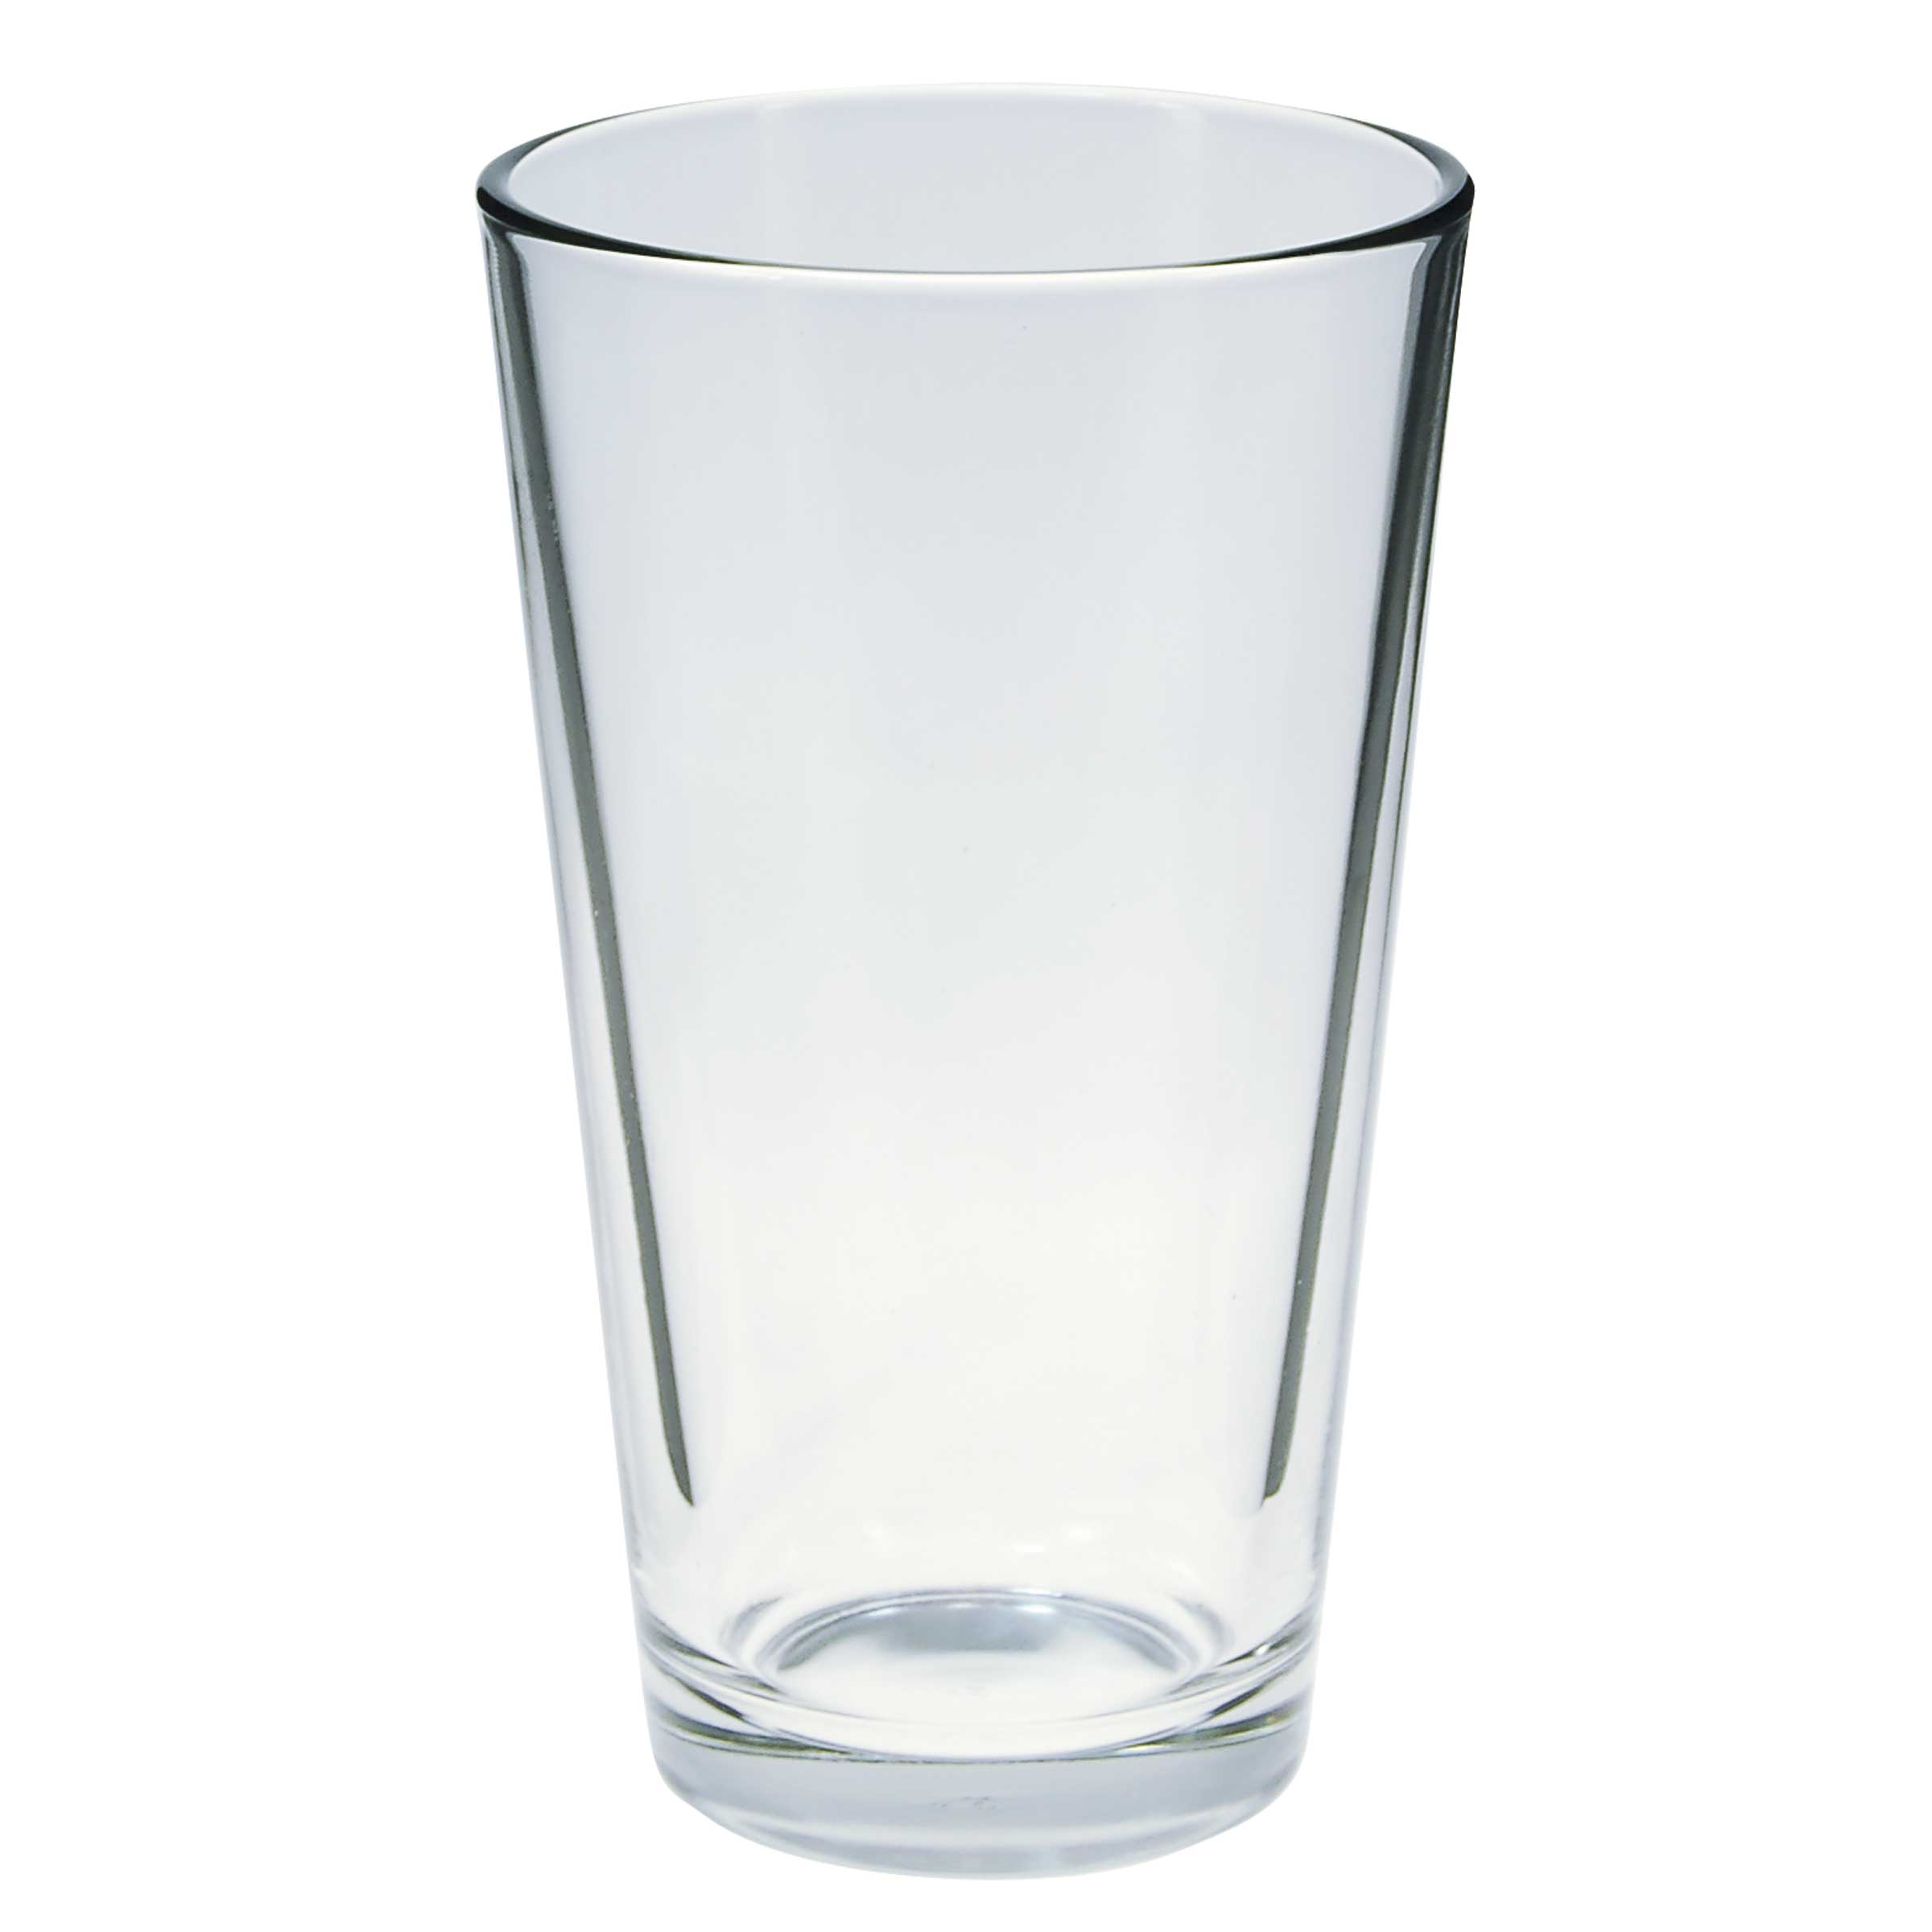 Classic Flared Pilsner/Pint Beer Glass - 16 oz